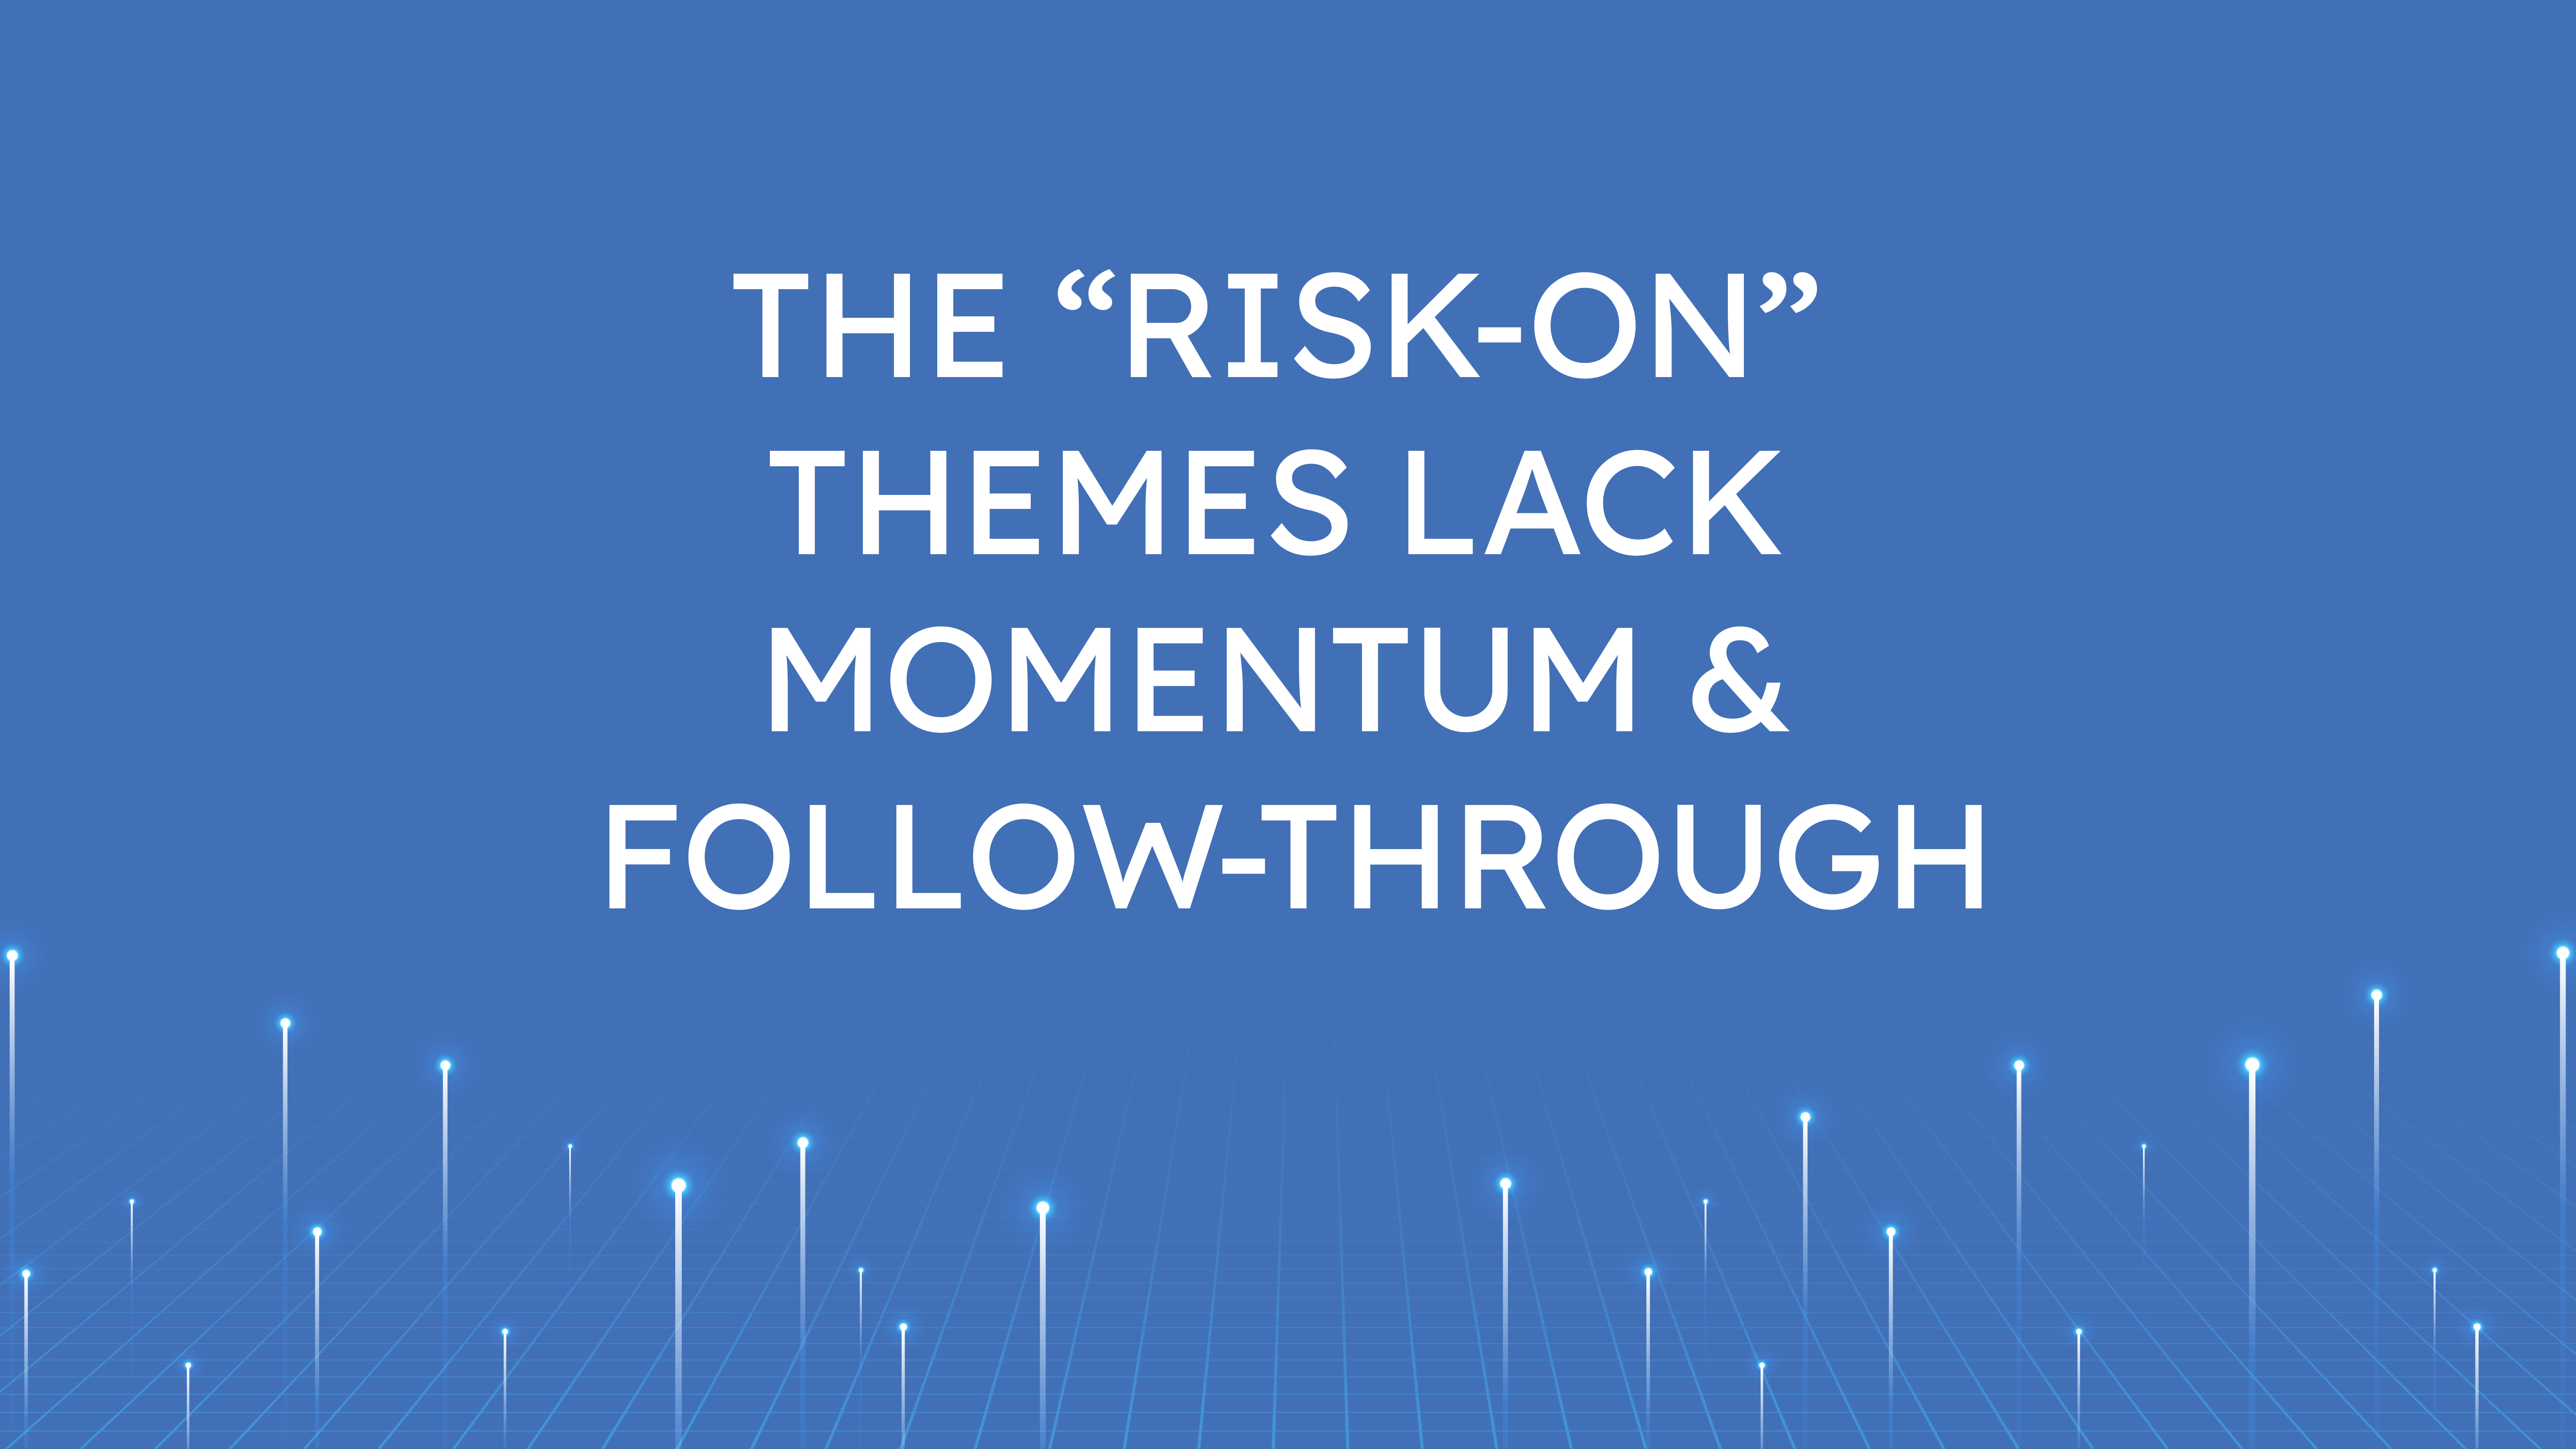 The “Risk-On” Themes  Lack Momentum & Follow-through